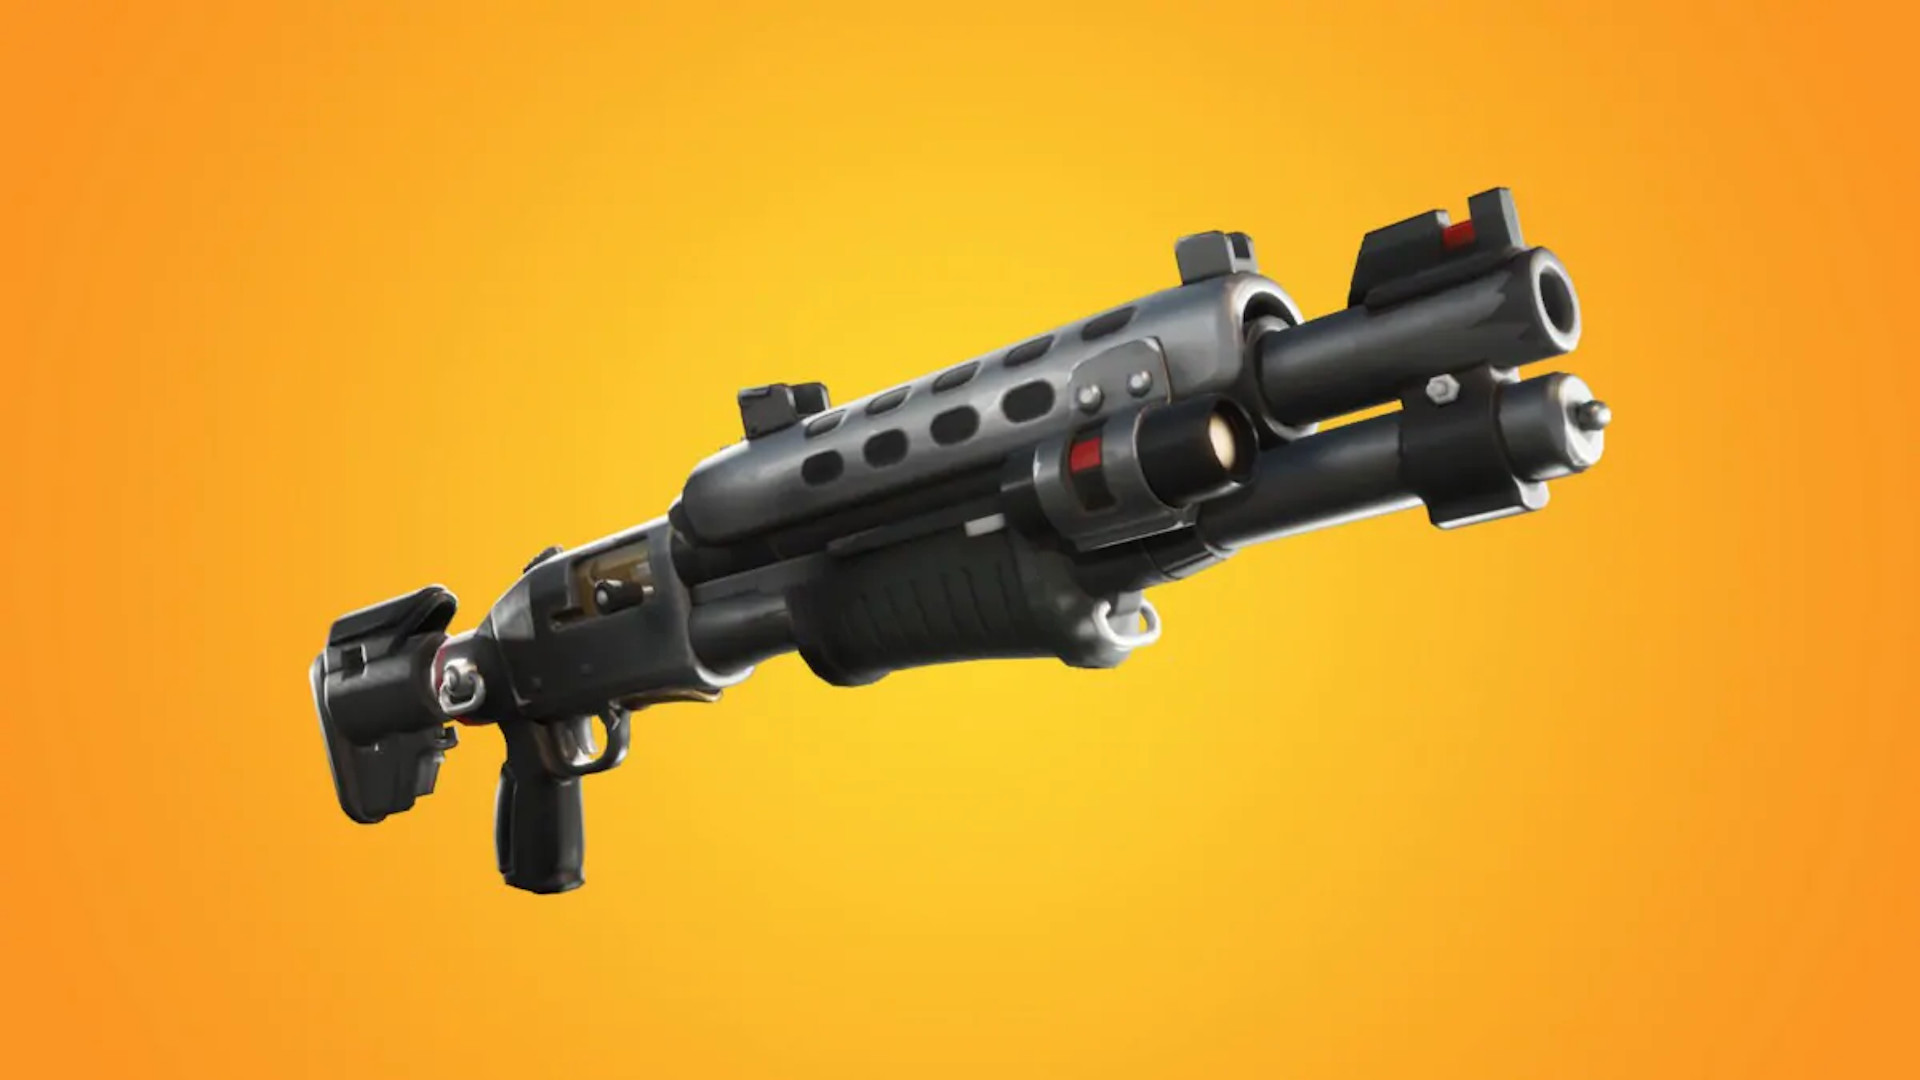 Best Gun In Fortnite Season 5 Fortnite Chapter 2 Season 7 Tier List The Best Weapons And How To Craft Them The Loadout